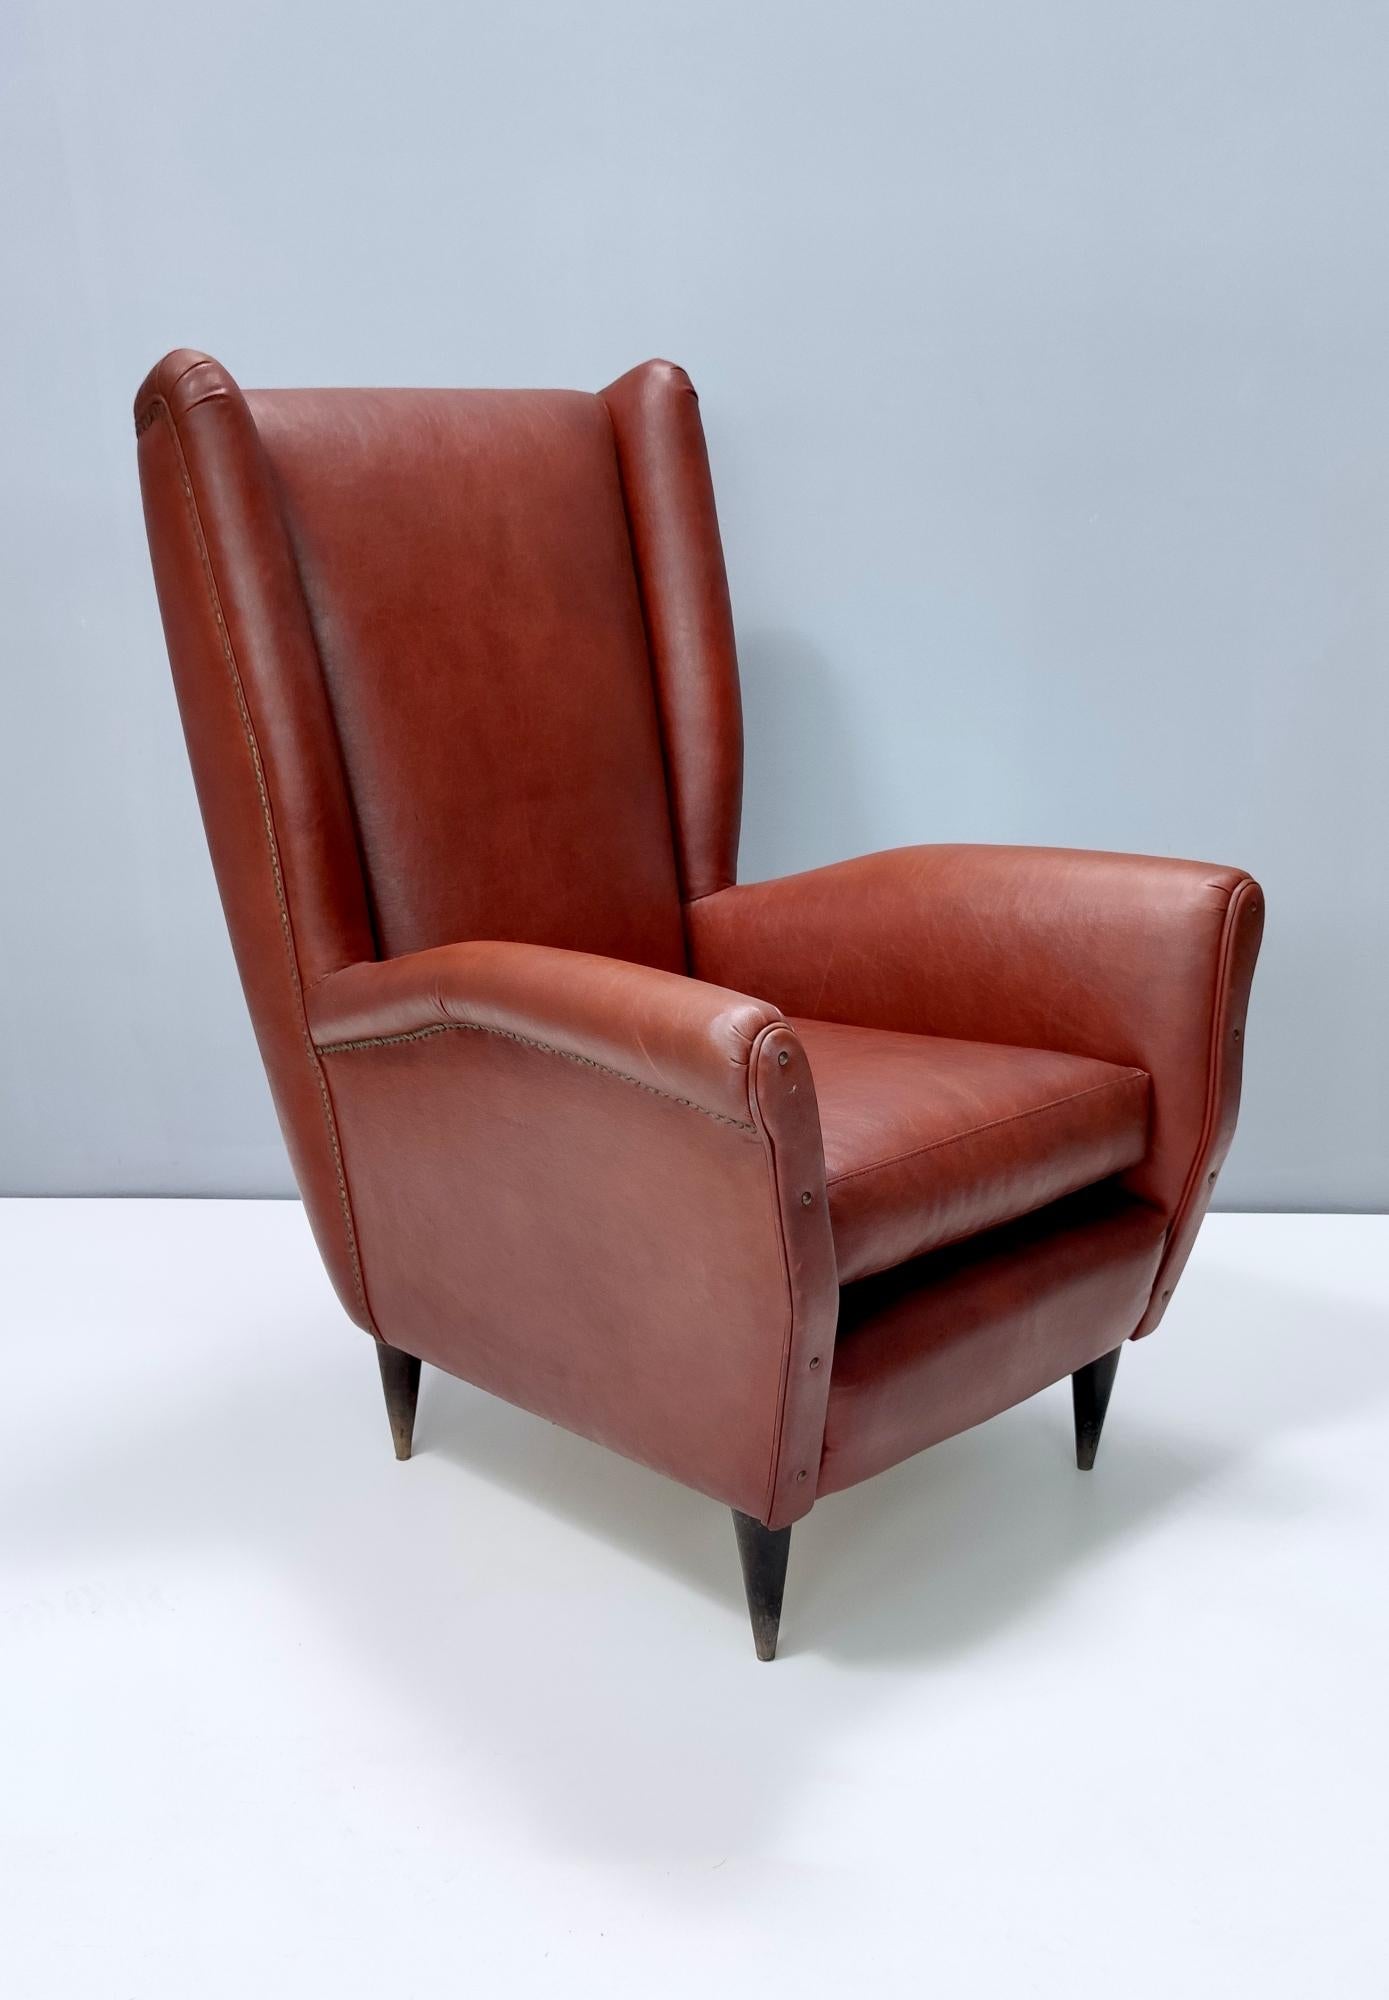 Italian Skai Wingback Armchair Ascribable to Mod. 512 attr. to Gio Ponti Produced by ISA For Sale